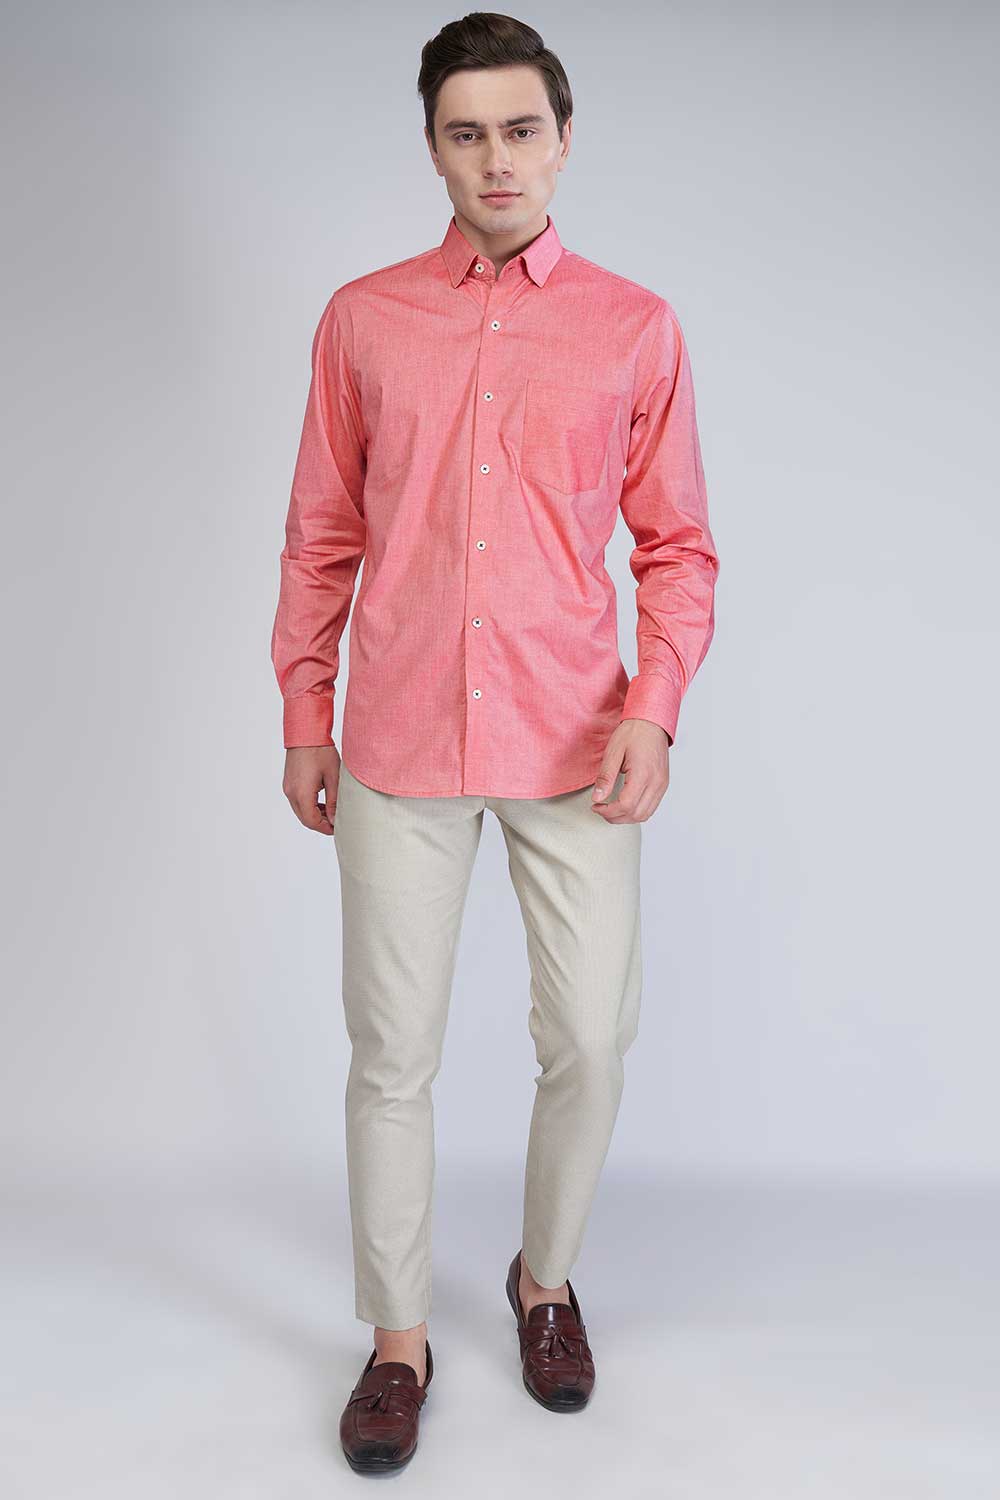 Casual Pink Shirt for Men